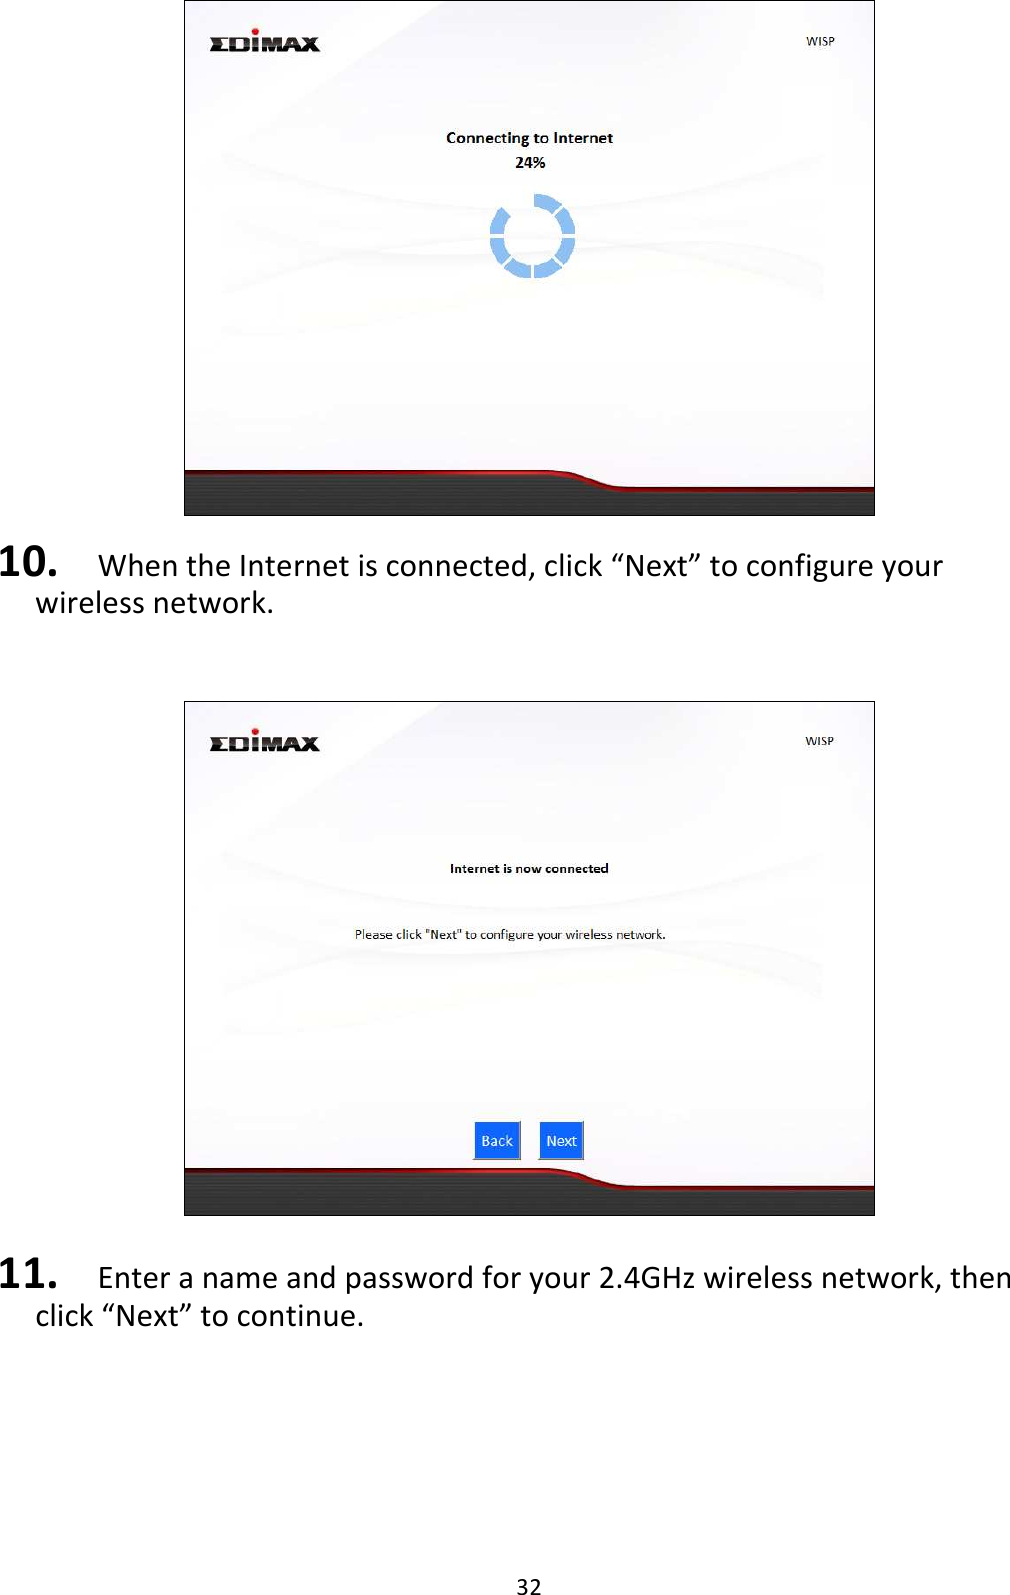 32   10. When the Internet is connected, click “Next” to configure your wireless network.     11. Enter a name and password for your 2.4GHz wireless network, then click “Next” to continue.  